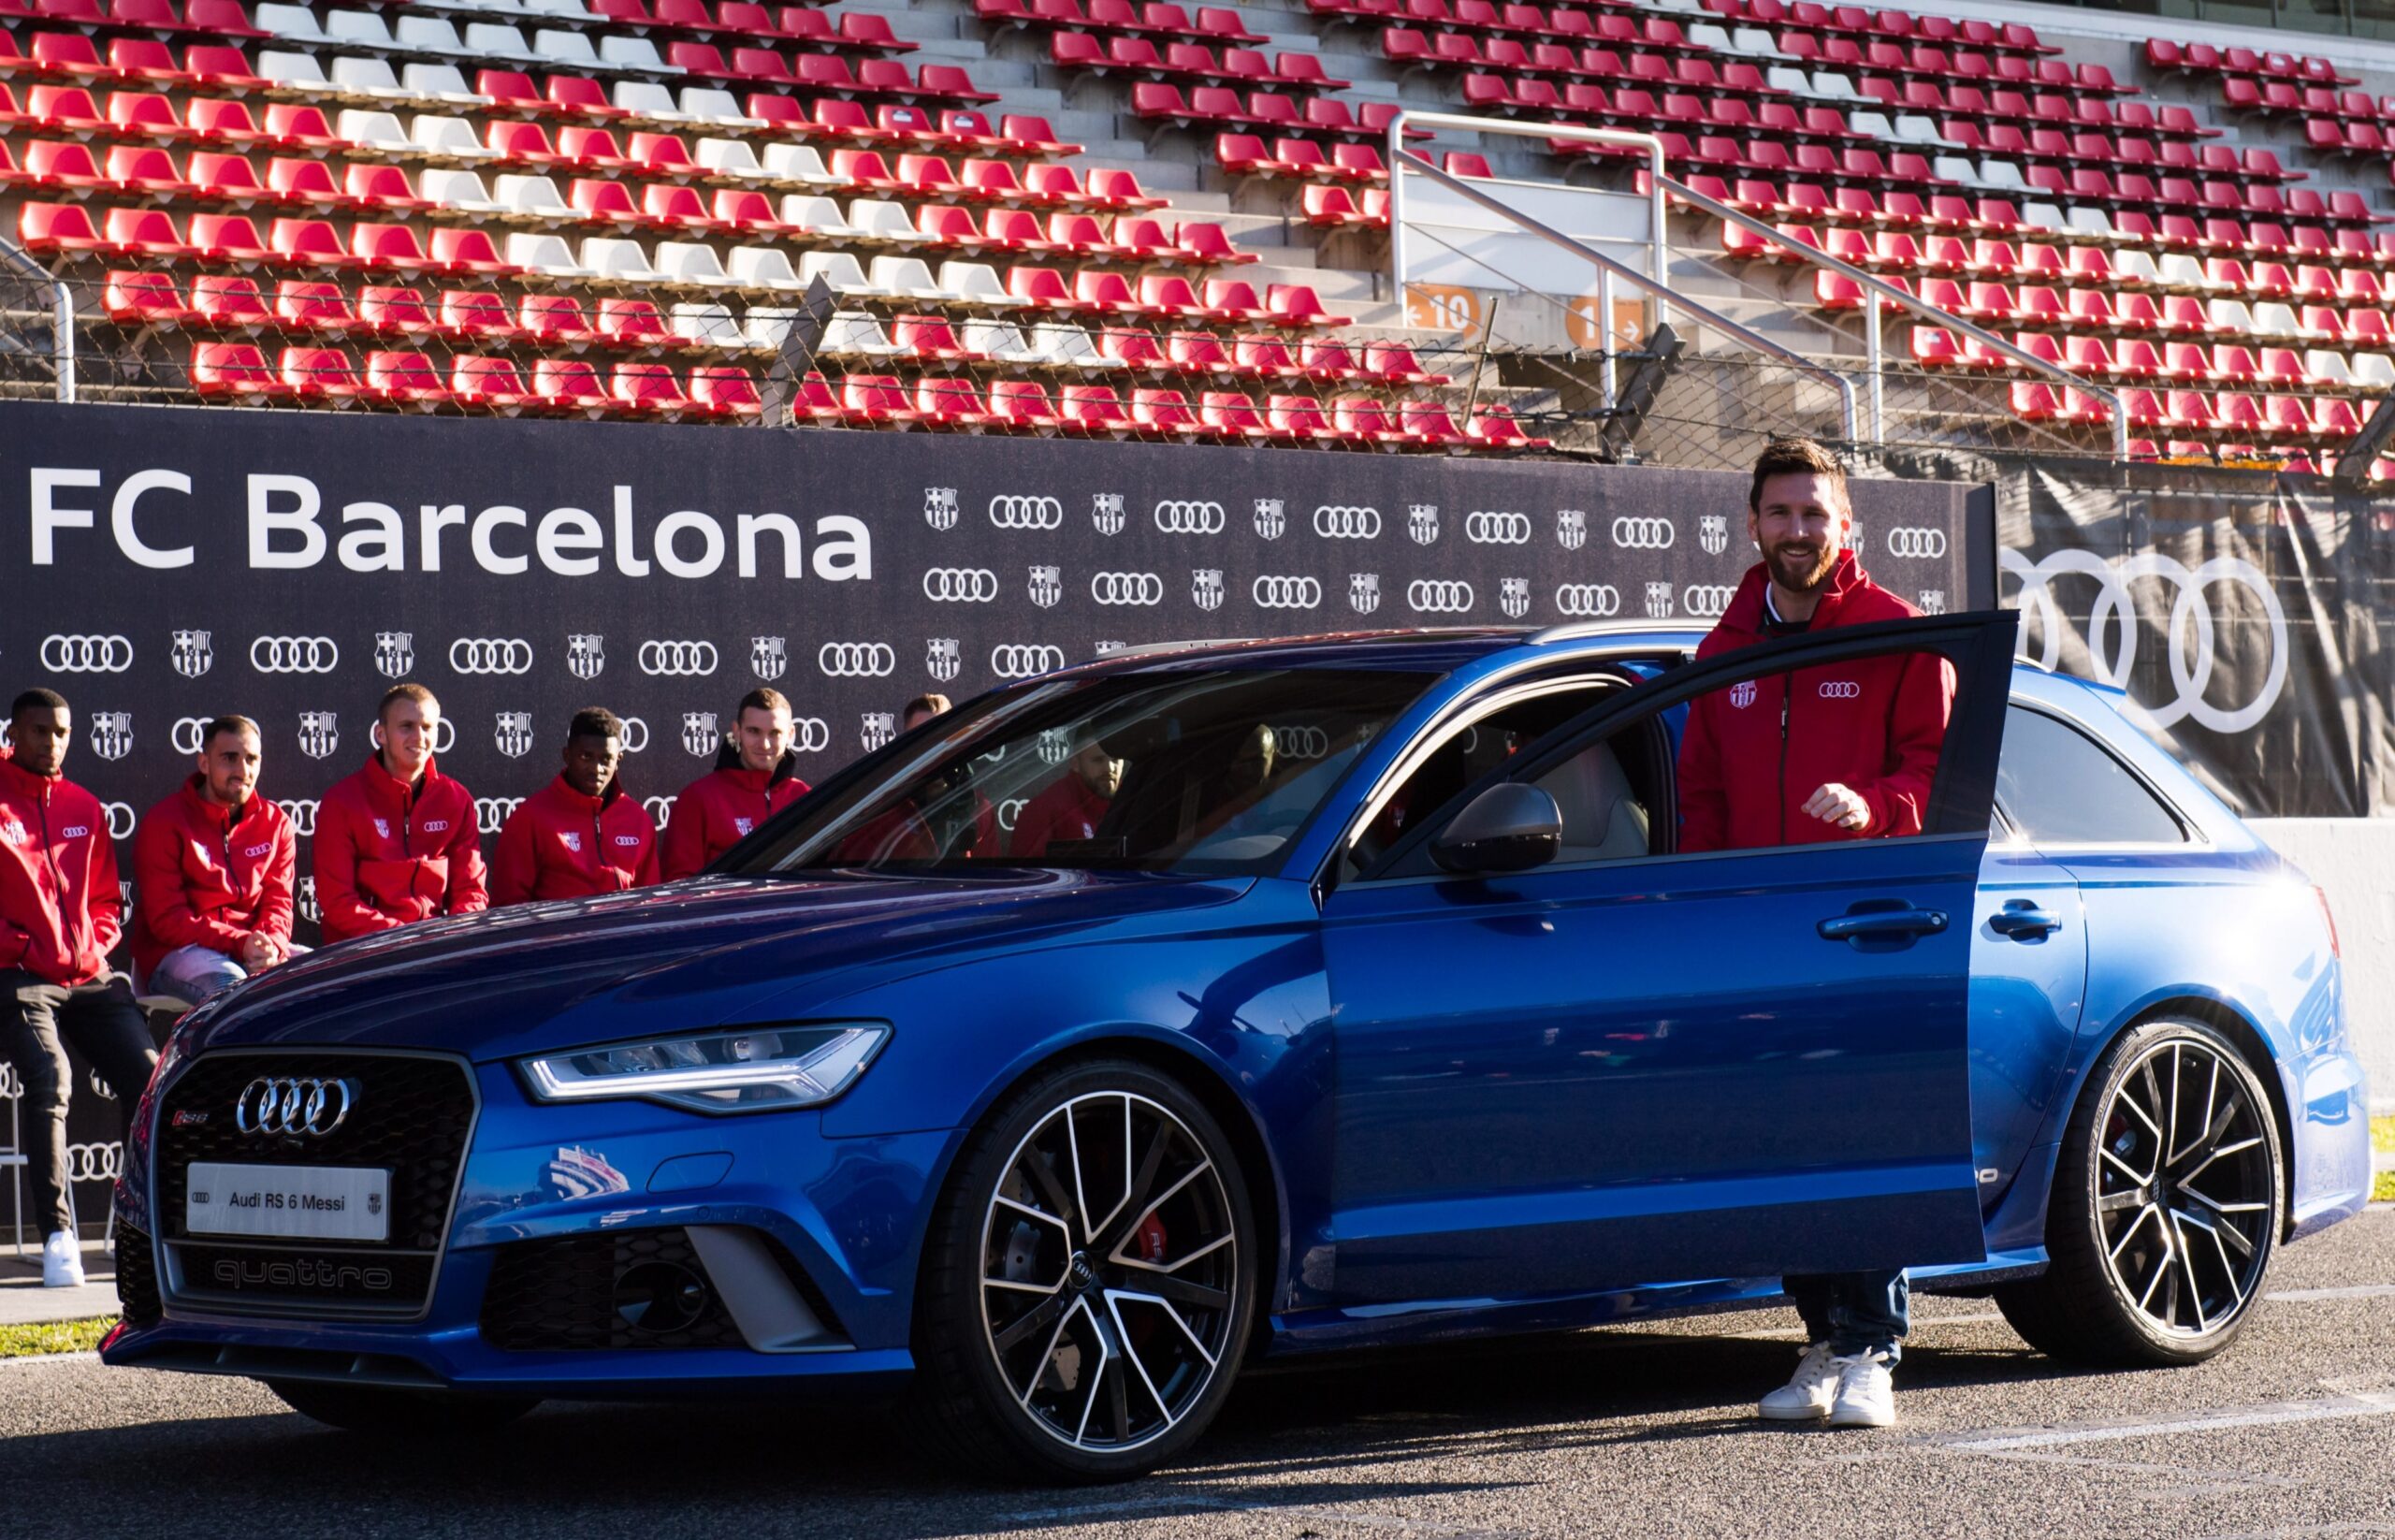 Barcelona's sponsorship deal with Audi has since expired